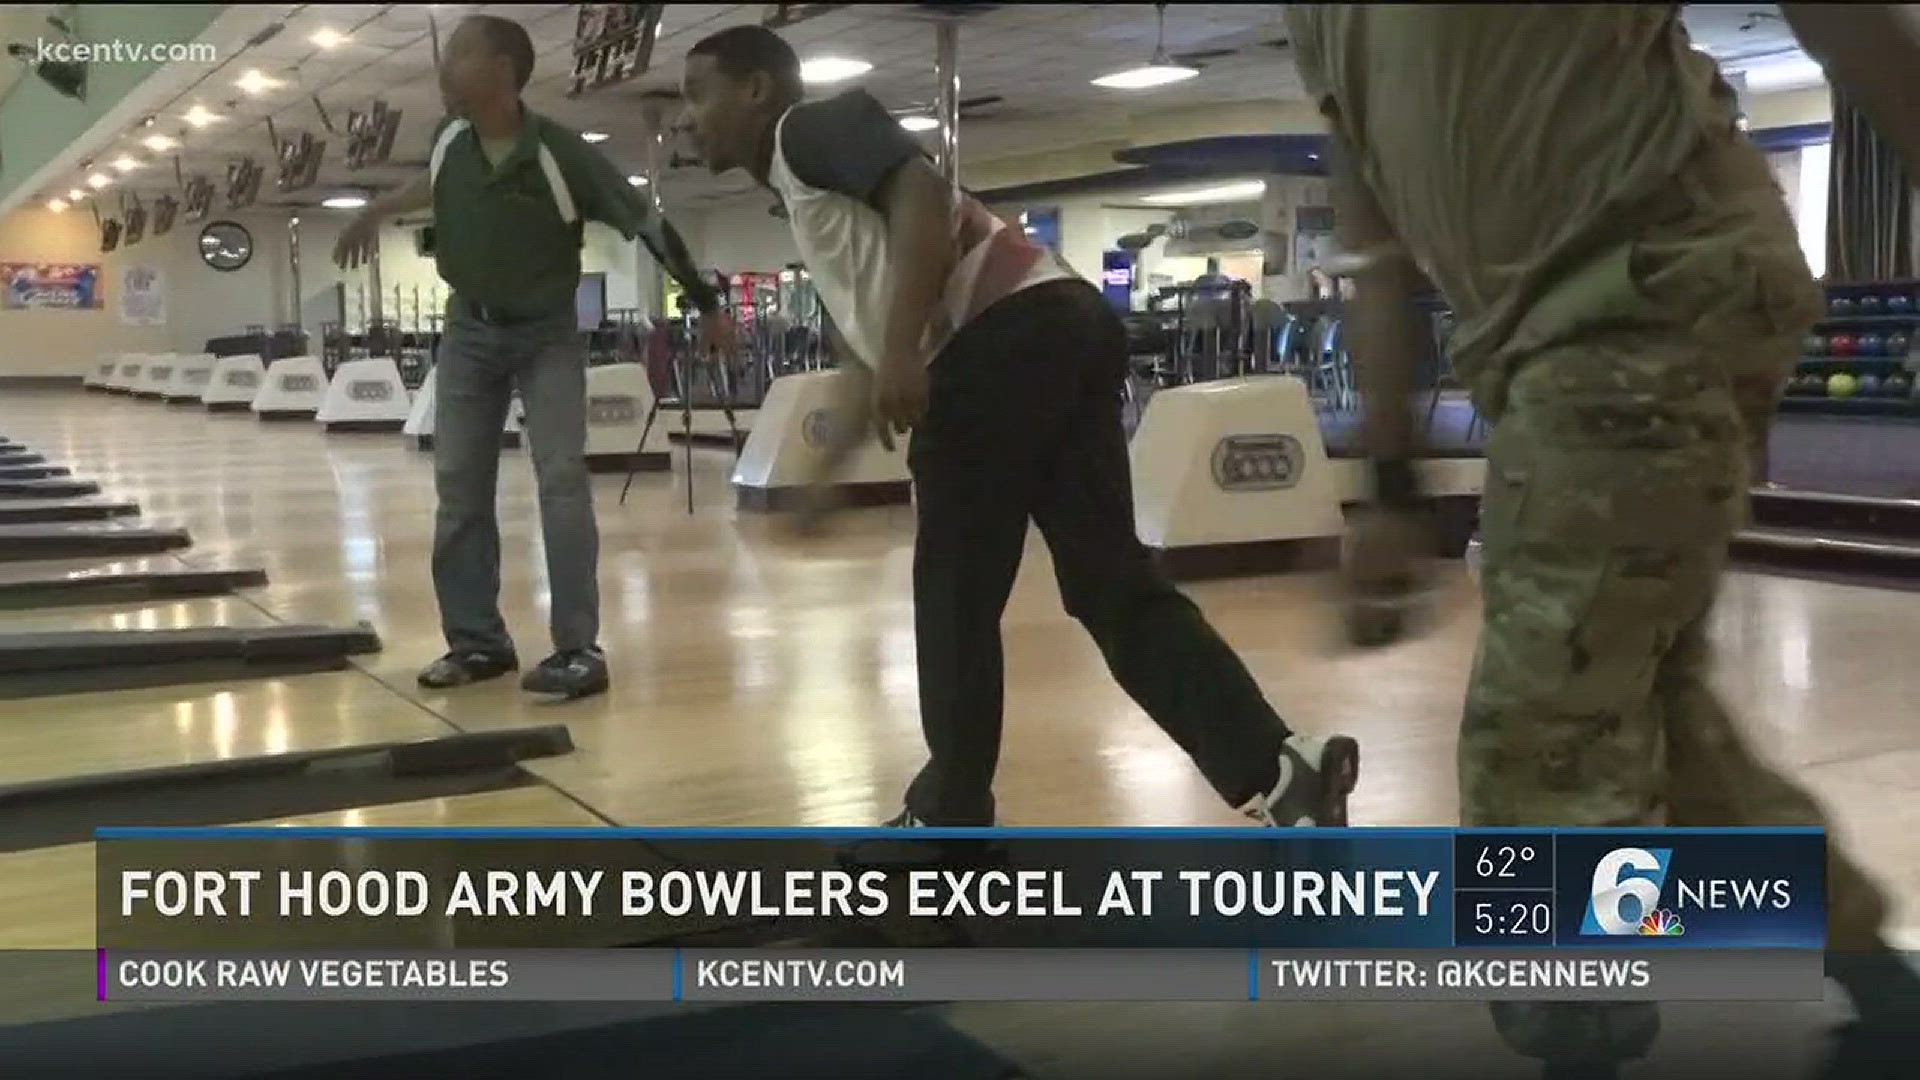 Some Fort Hood Army bowlers are back home after placing in the top percentage at the Military Bowling Championships in Las Vegas.